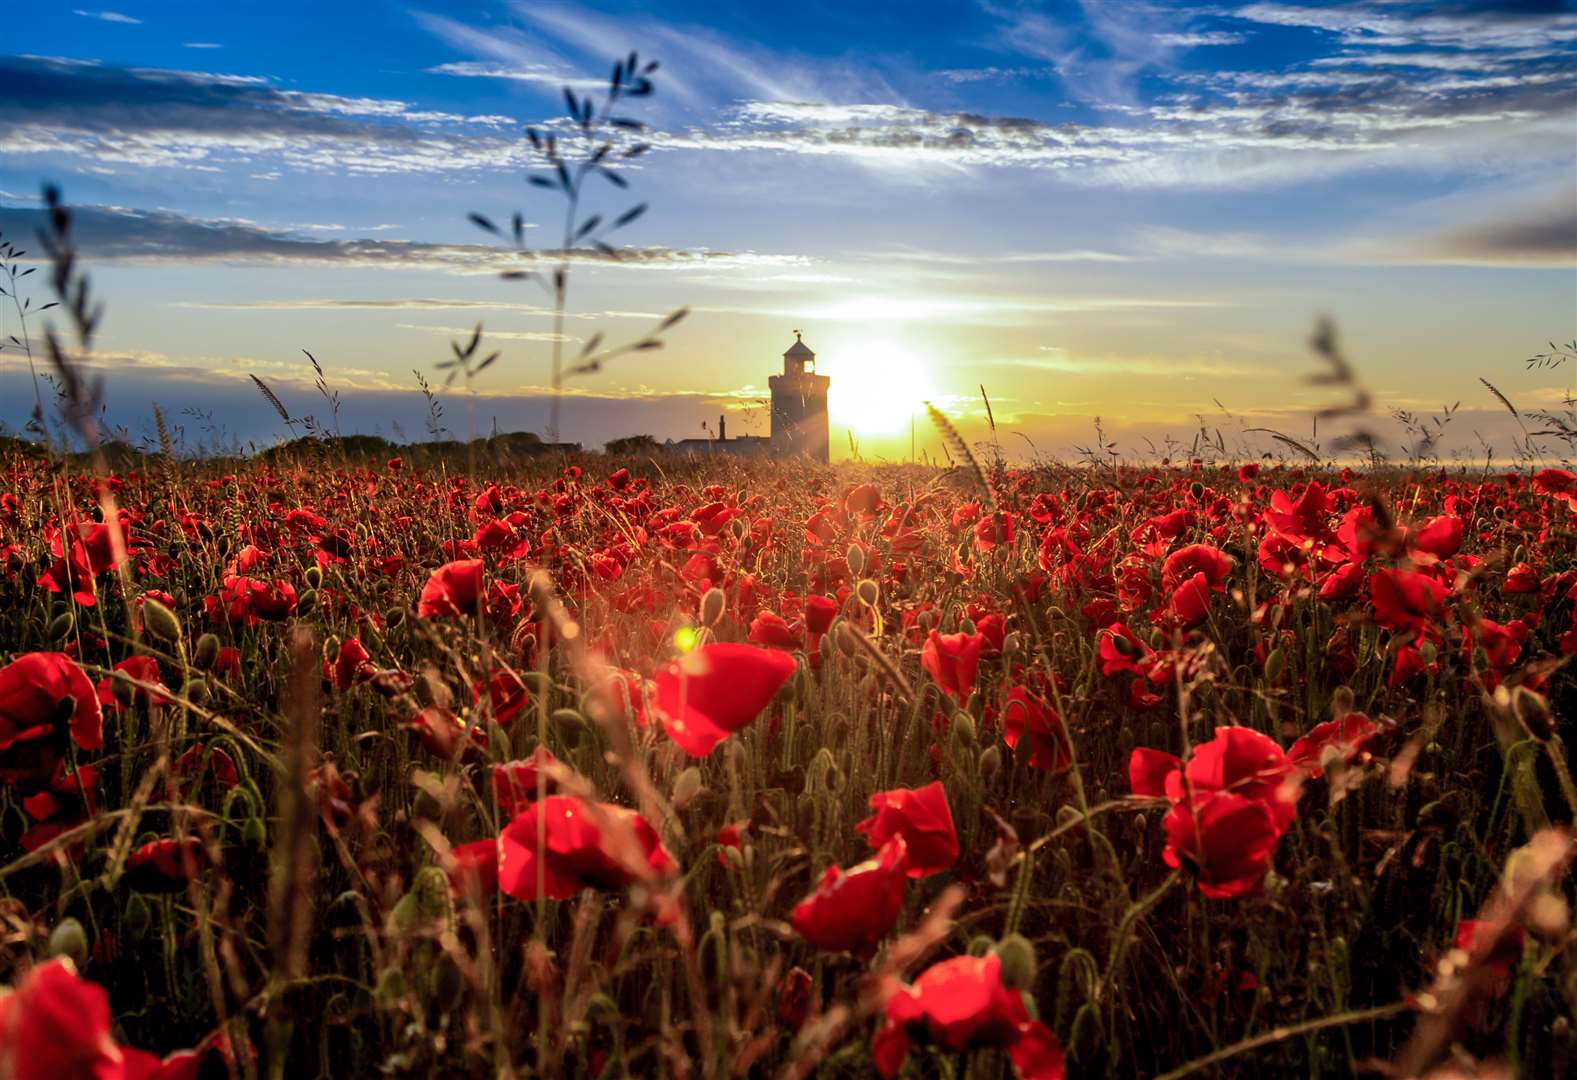 The poppies may not be flowering at this time of year, but the White Cliffs of Dover always look picturesque Picture: Matt Hayward/National Trust